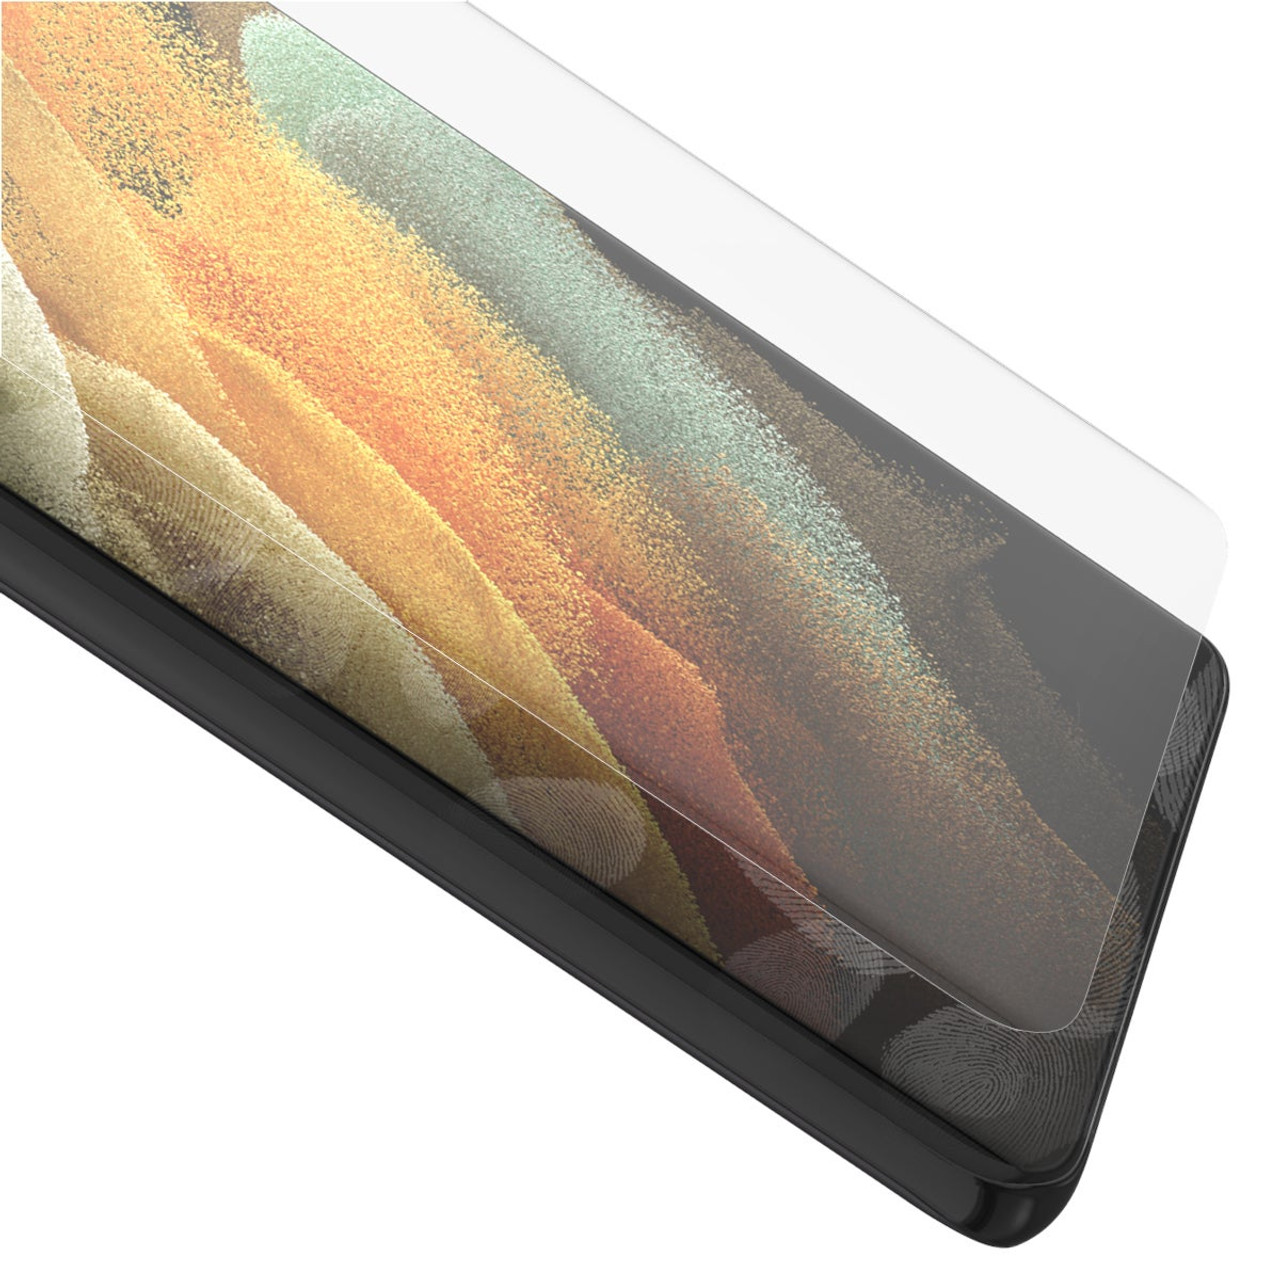 InvisibleShield GlassFusion+ for the Samsung Galaxy S21 Ultra 5G